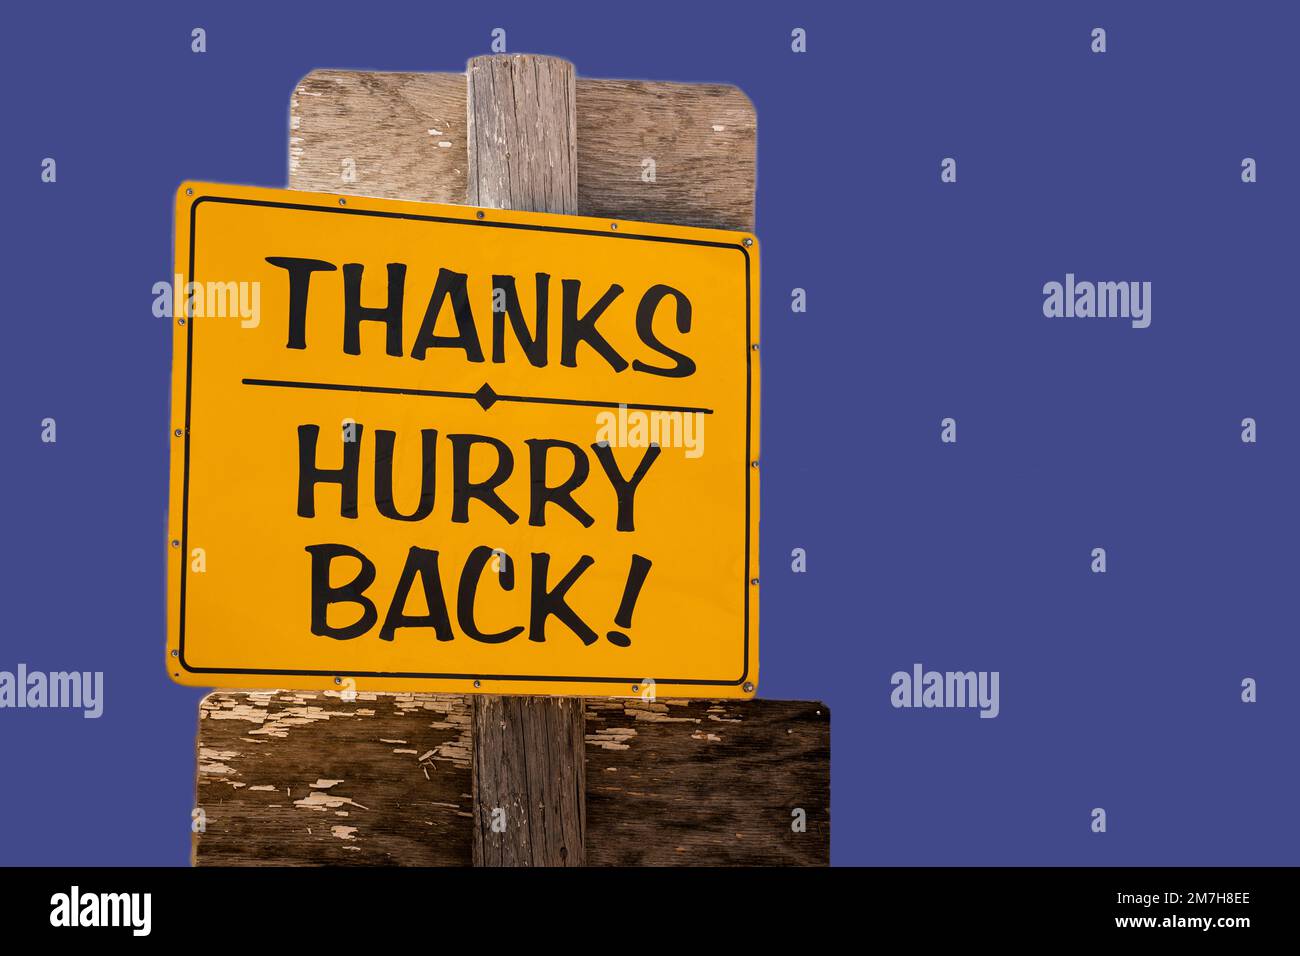 Hurry Back isolated road sign says thanks for staying. It indicates a visitor is ending vacation stay. It is an expression of gratitude. Bright cutout. Stock Photo